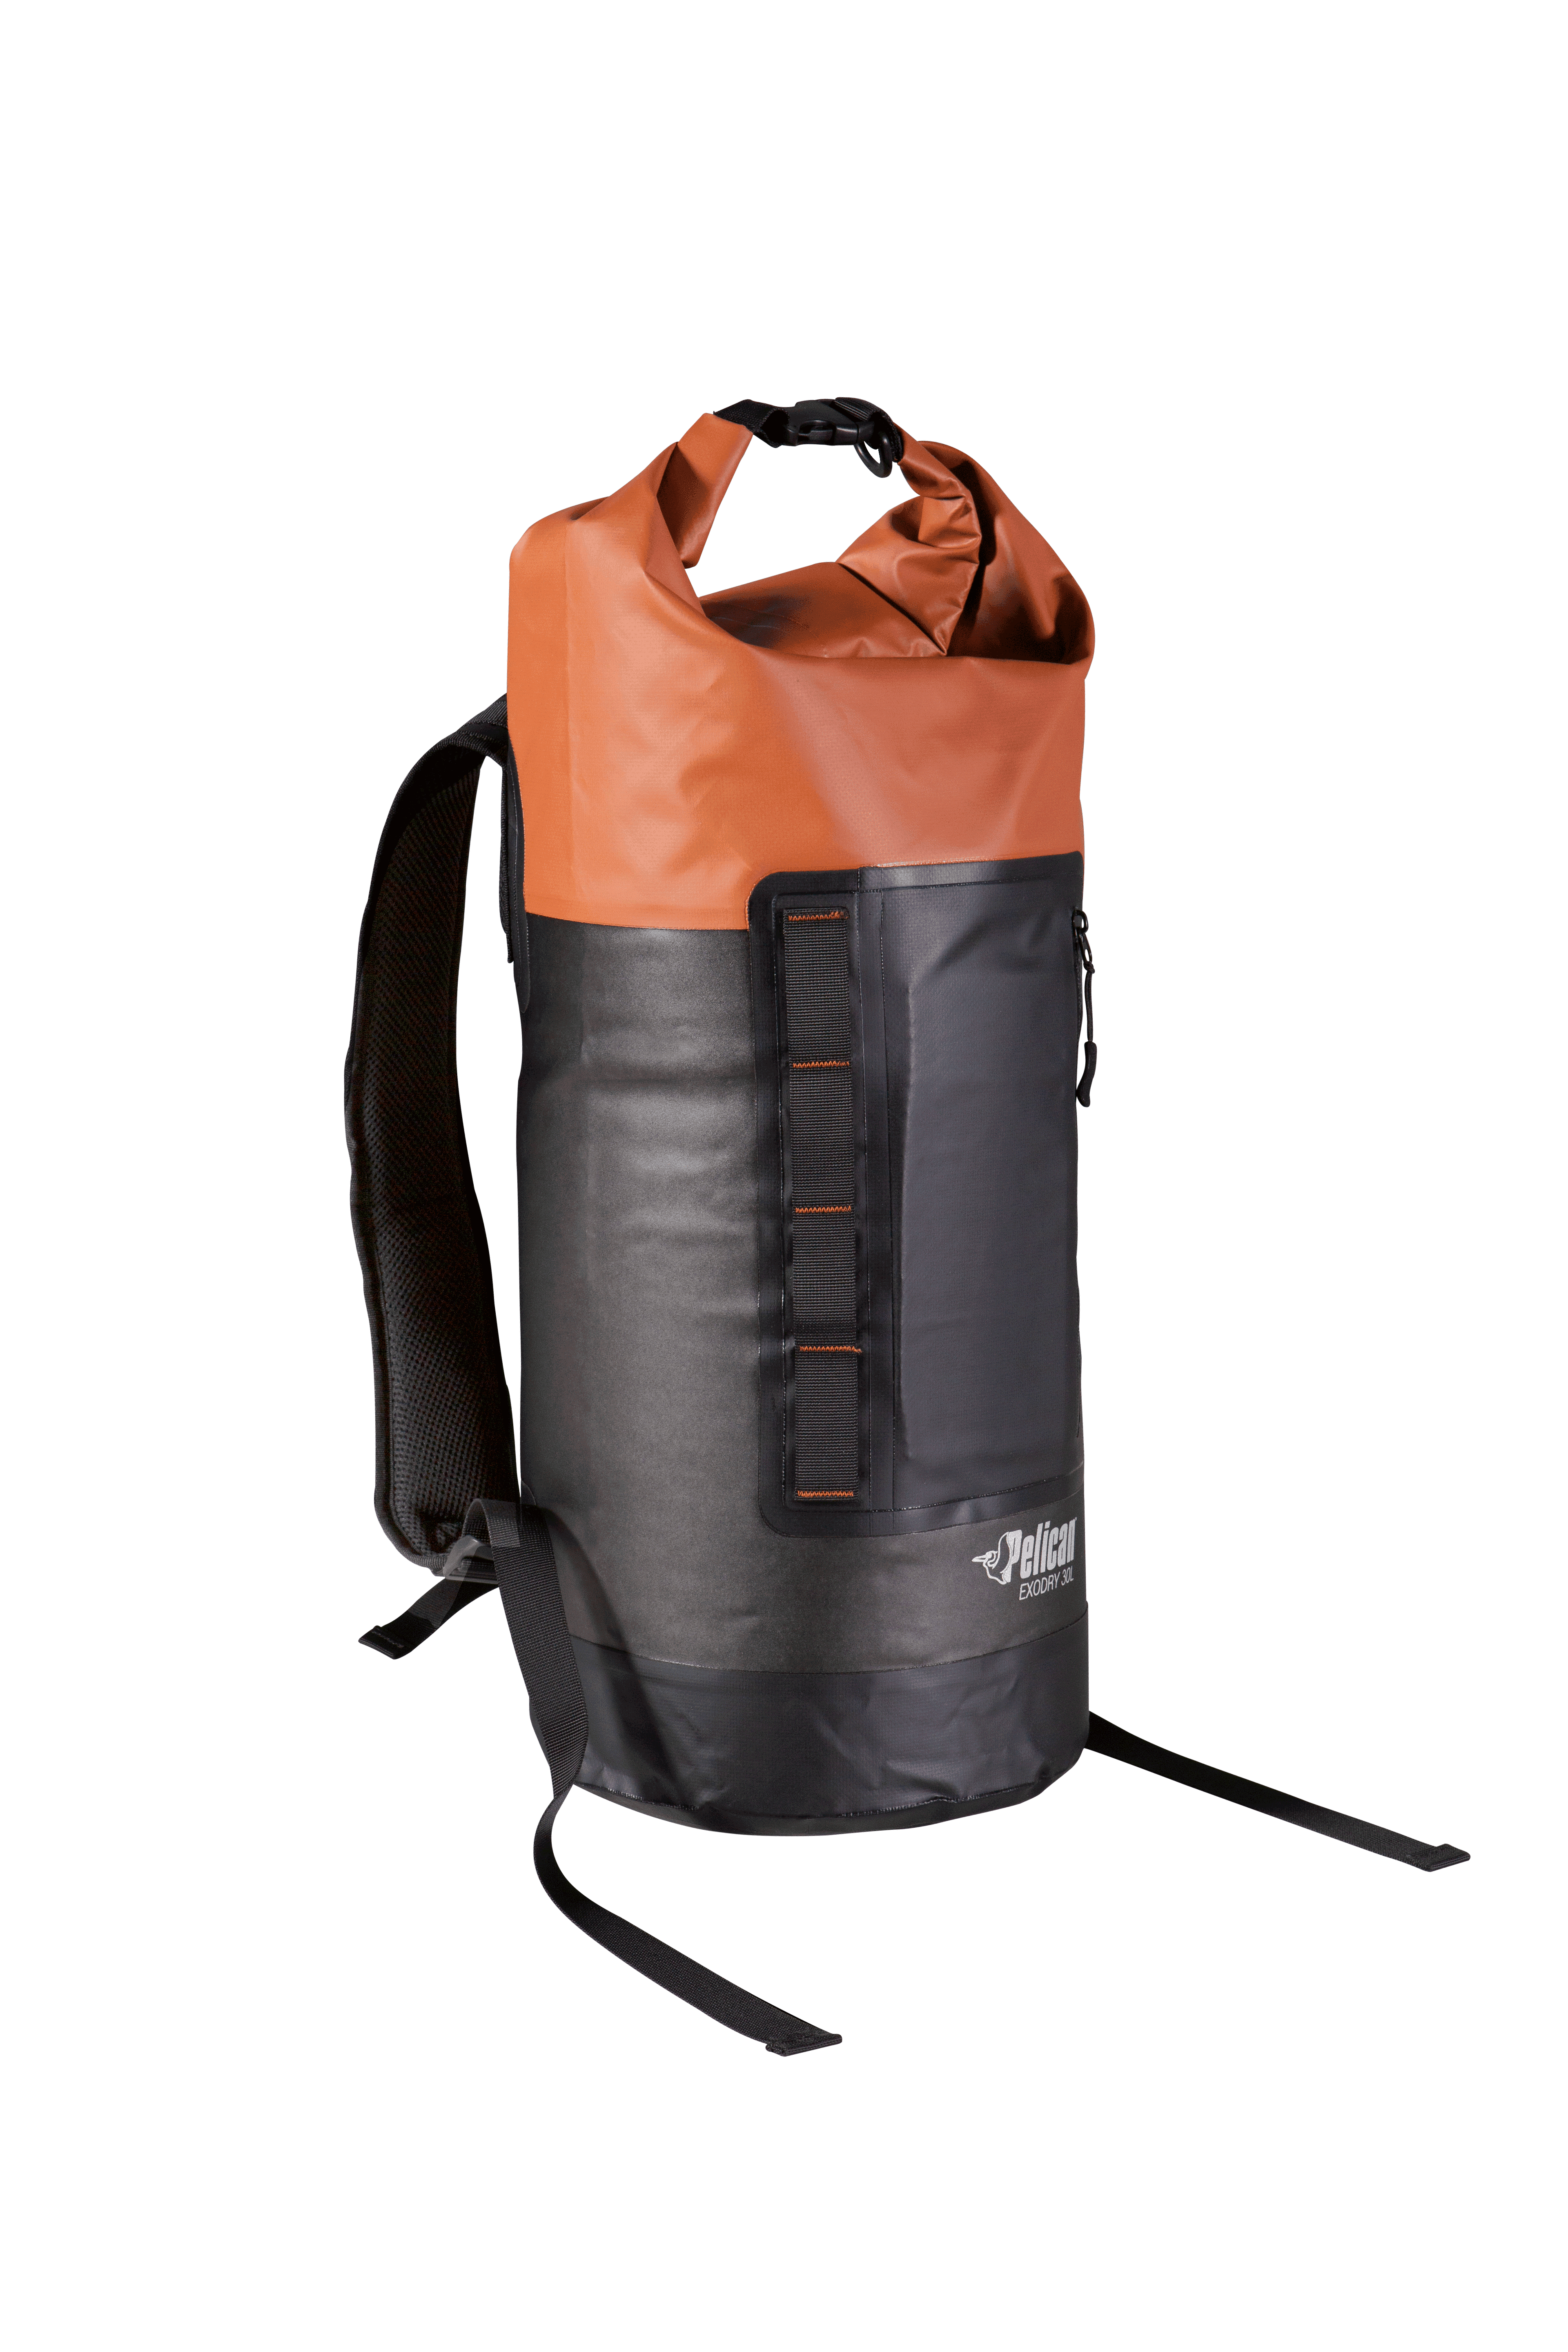 45 L bag for keeping all kit dry CAMO Waterproof dry bag Padded straps 